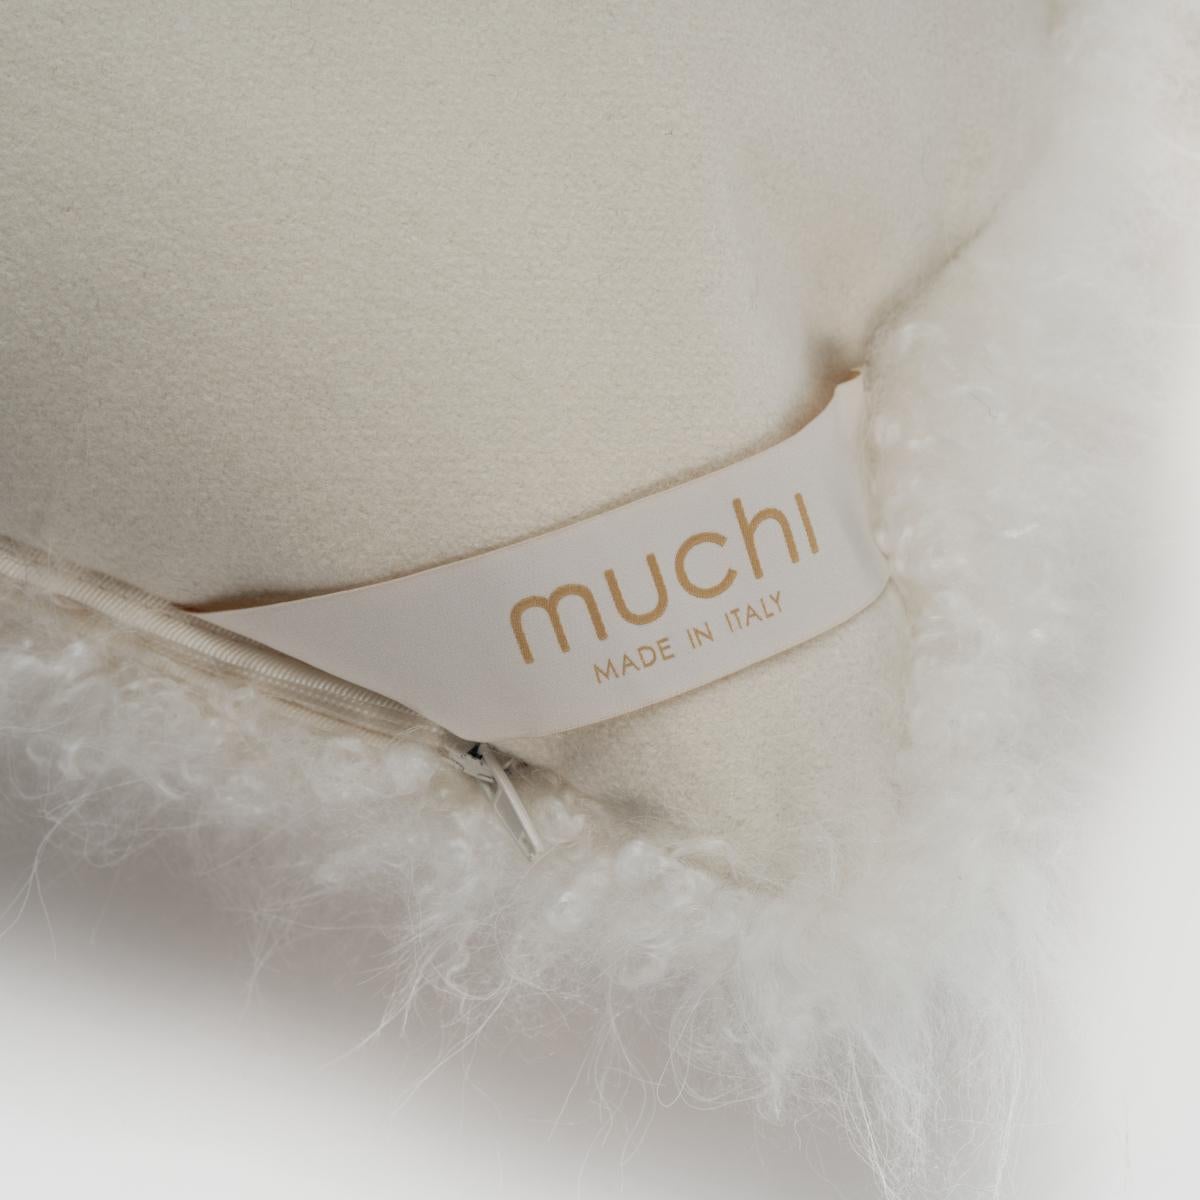 A connoisseur's cushion, using cashmere leather from which the precious yarn is obtained, in its purest form. 

The several centimeters high pile alternating between smooth and curly creates a new pile that 